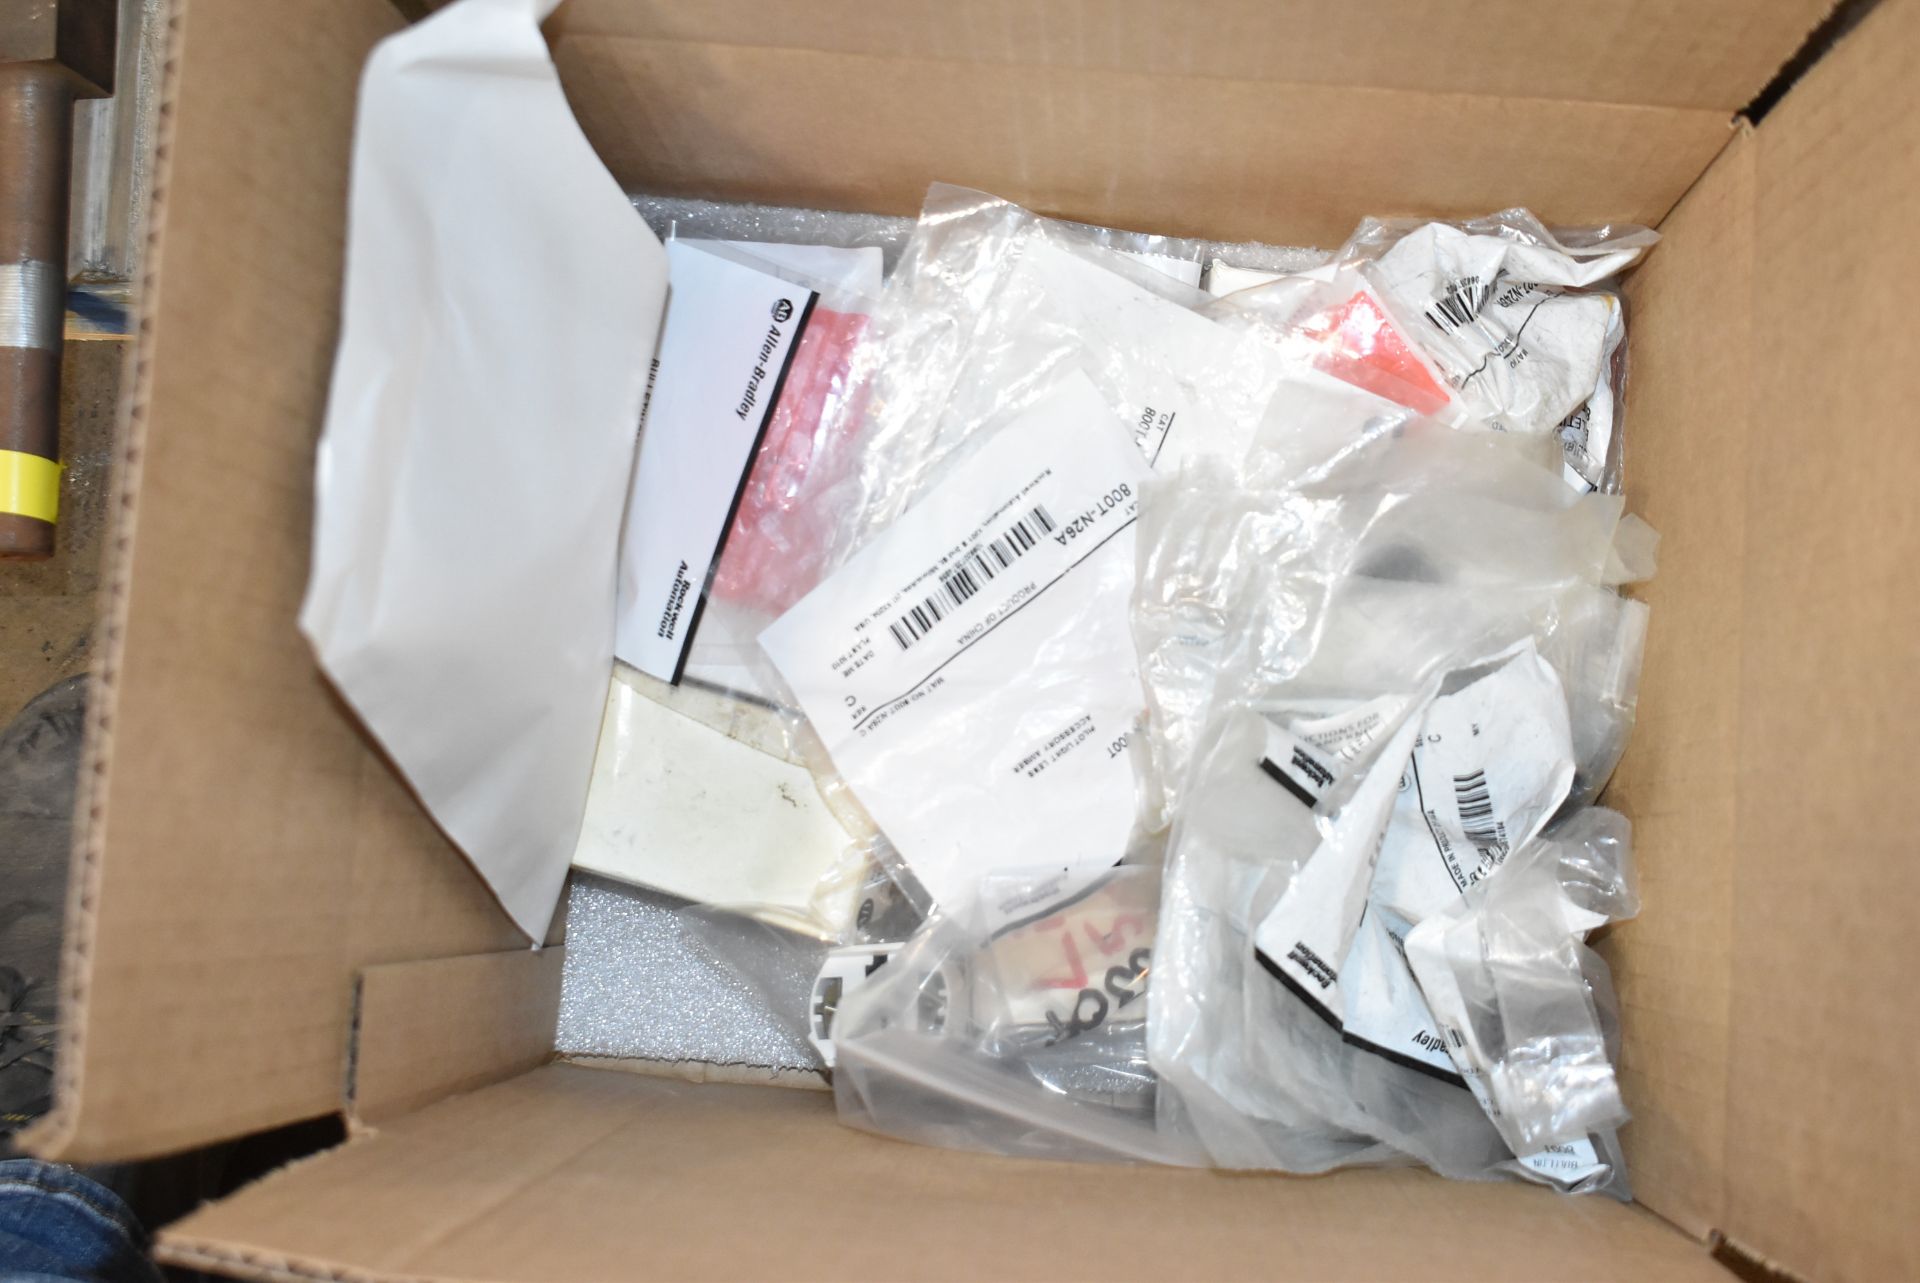 LOT/ CONTENTS OF PALLET ALLEN BRADLEY POWER FLEX DRIVES, SWITCHES AND PARTS - Image 8 of 10